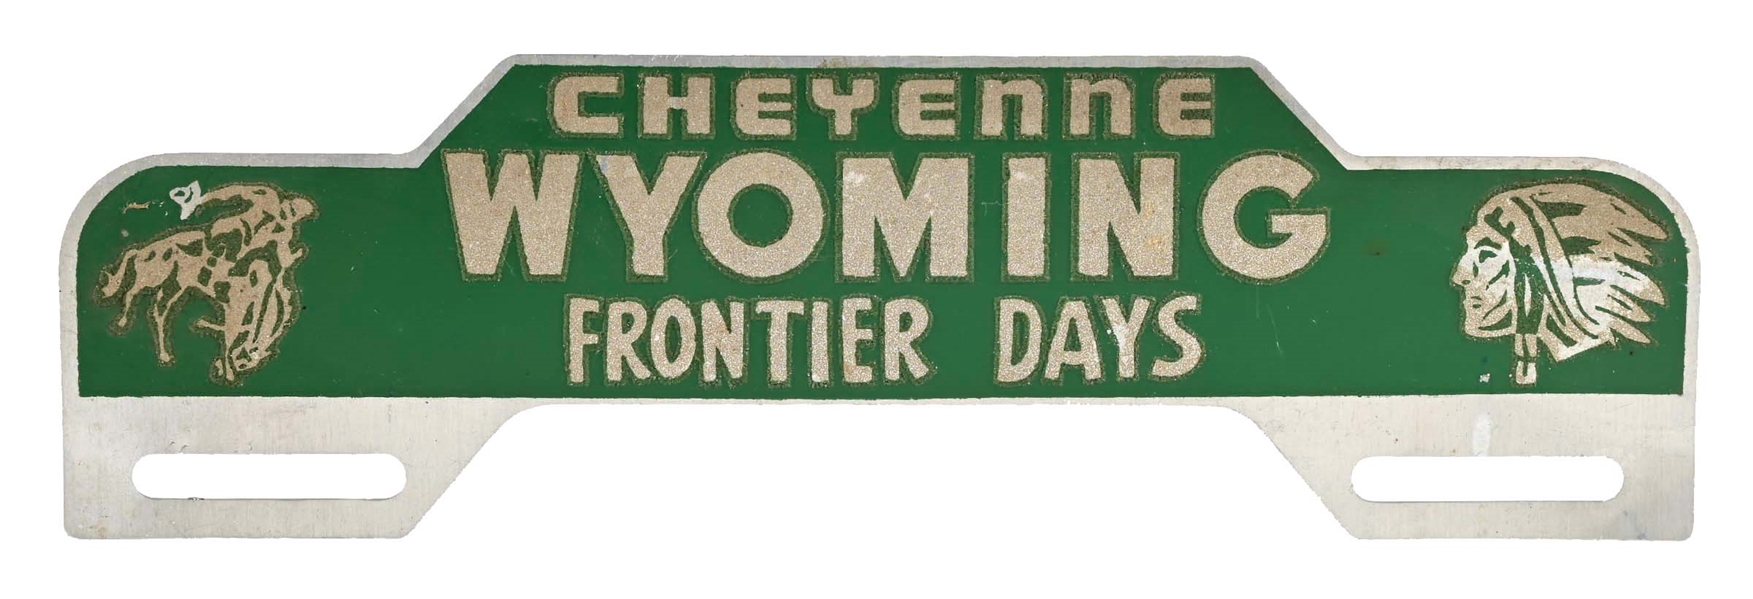 CHEYENNE WYOMING FRONTIER DAYS PAINTED ALUMINUM LICENSE PLATE TOPPER W/ NATIVE AMERICAN GRAPHIC.